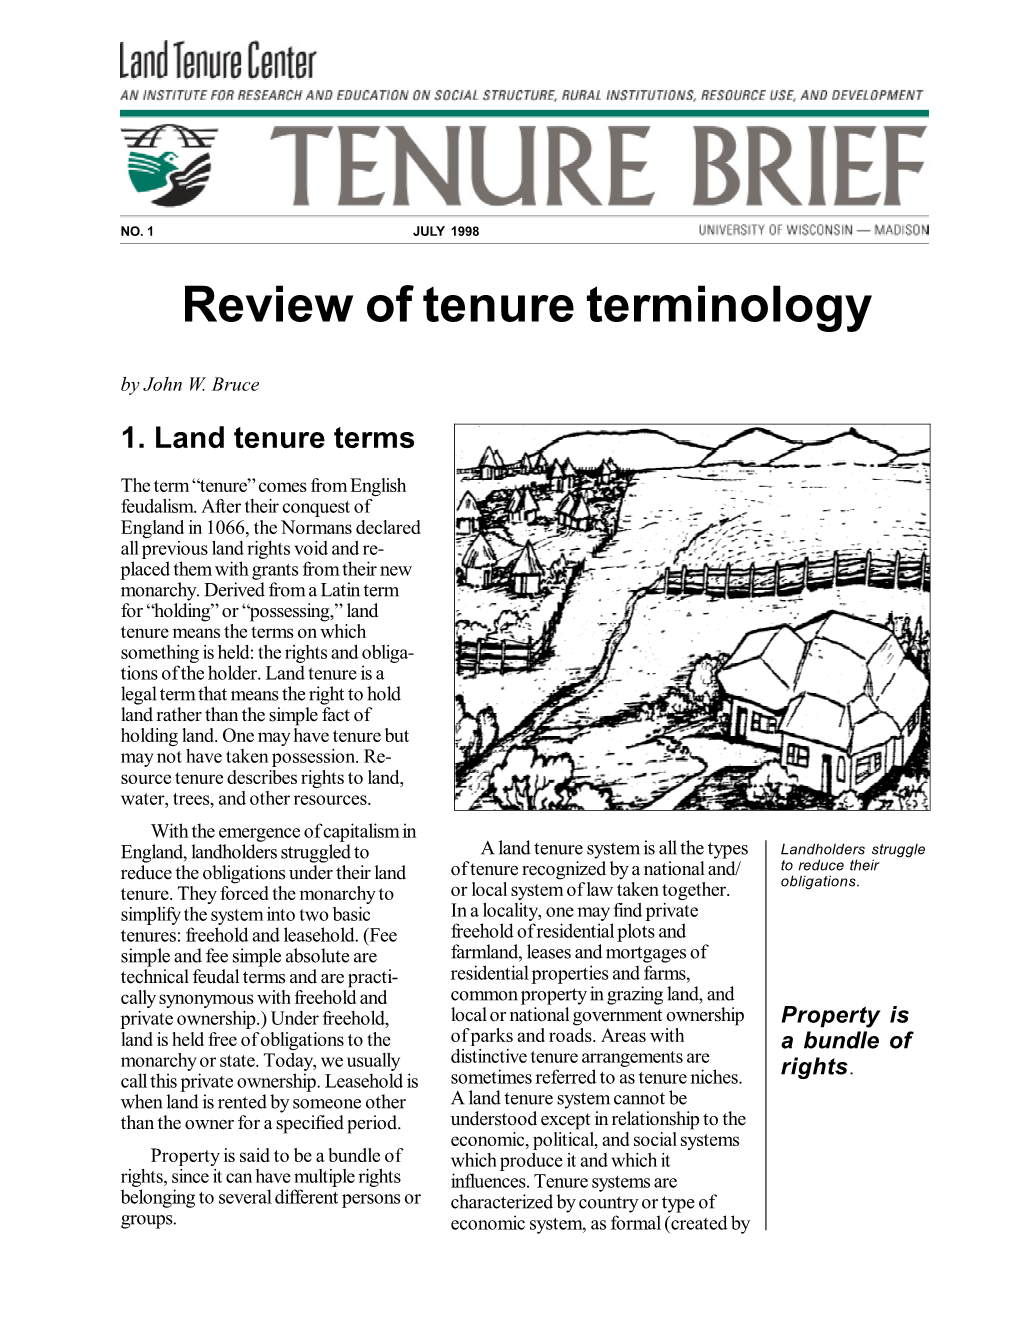 Review of Tenure Terminology by John W